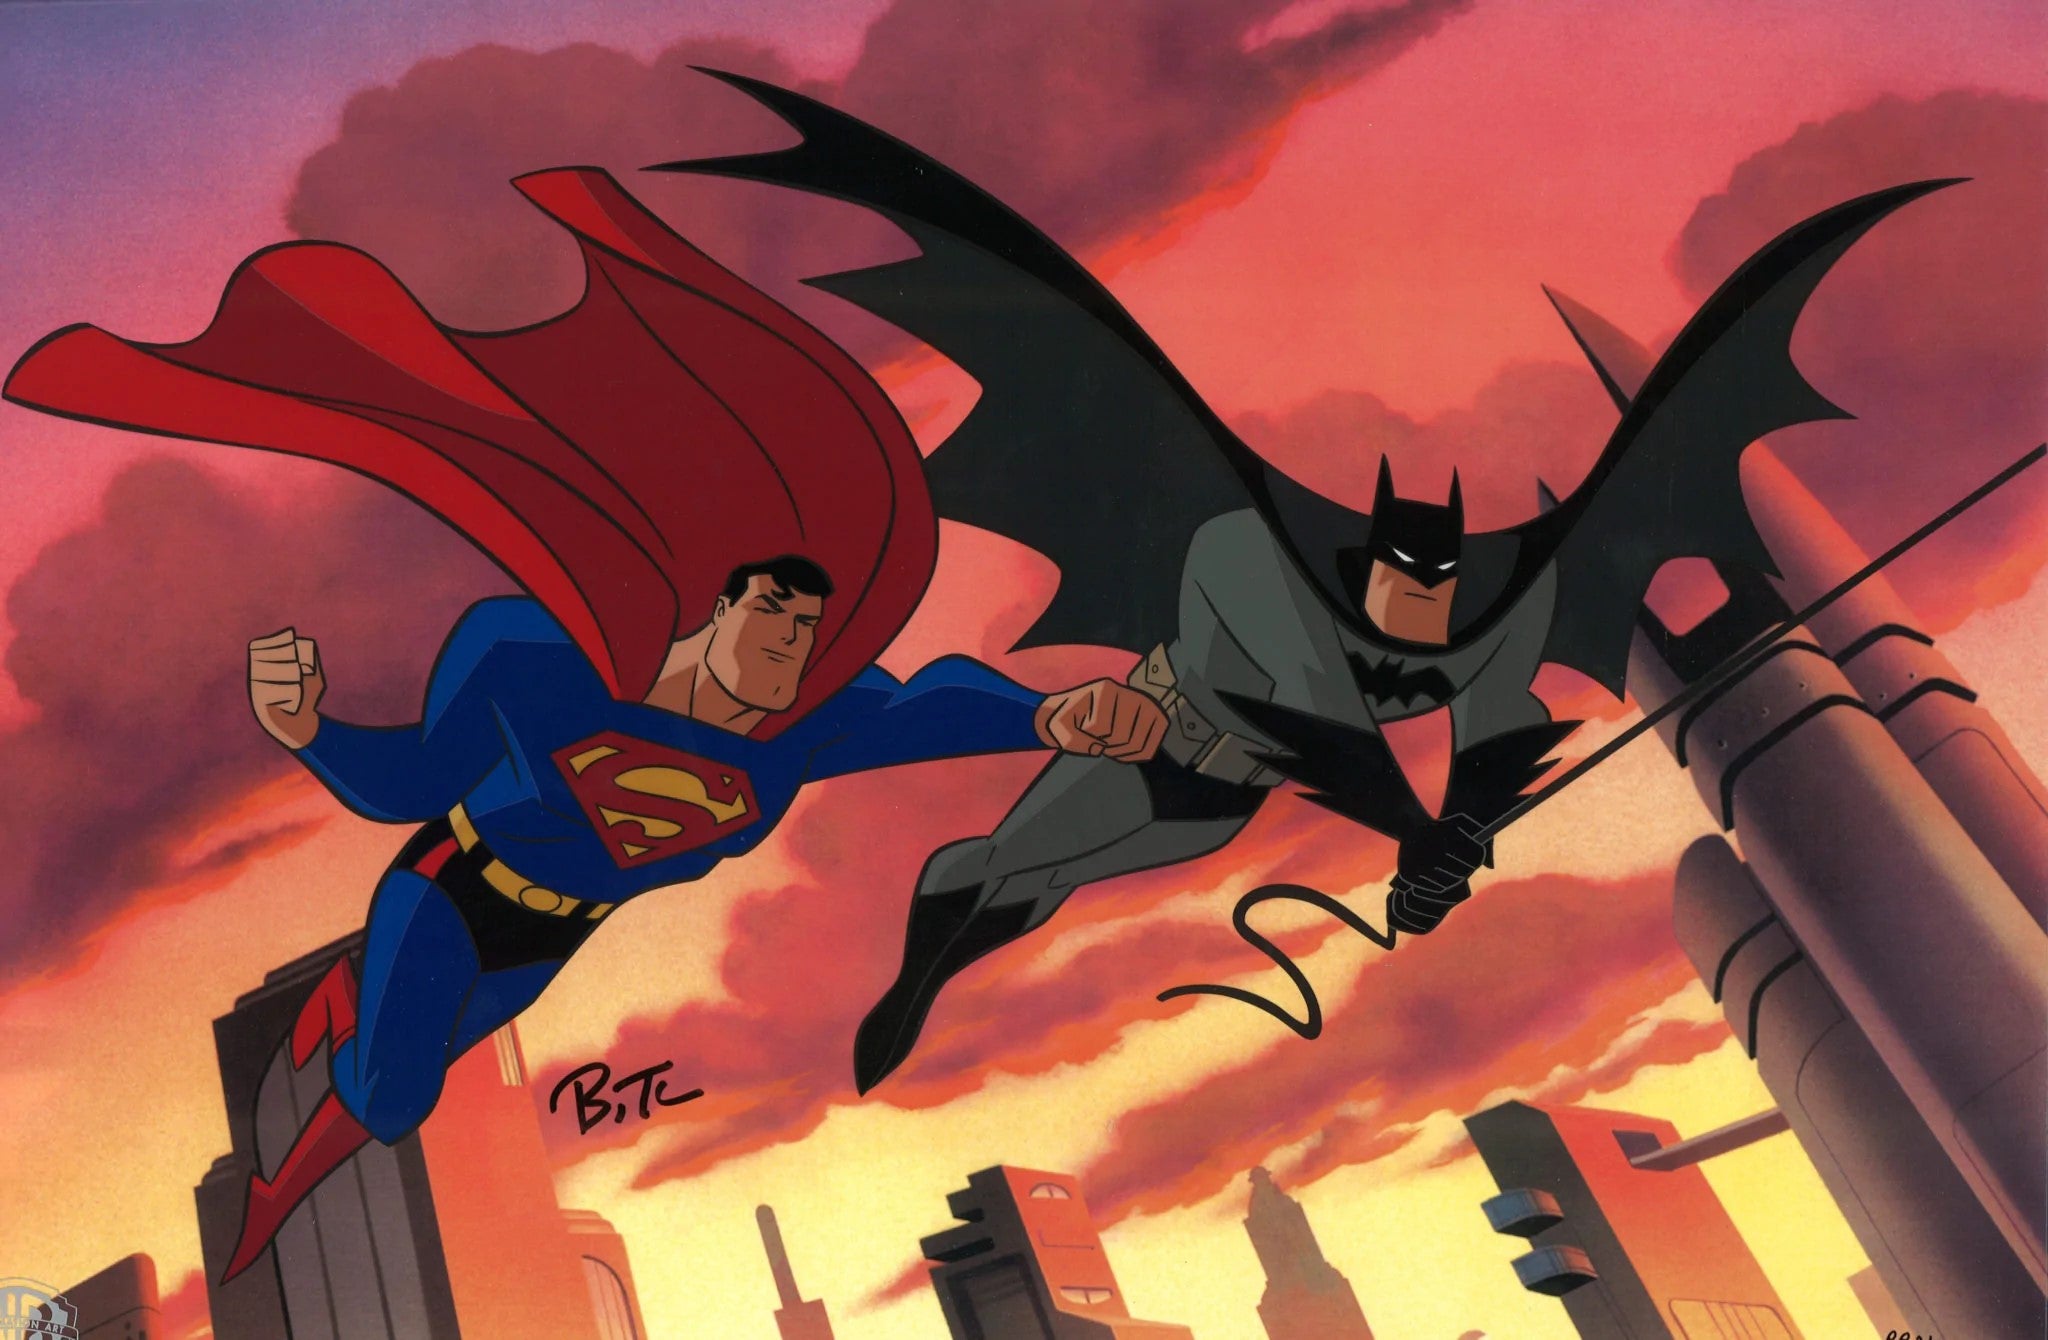 World's Finest - By Bruce Timm - Limited Edition Hand-Painted Cel featuring Batman and Superman